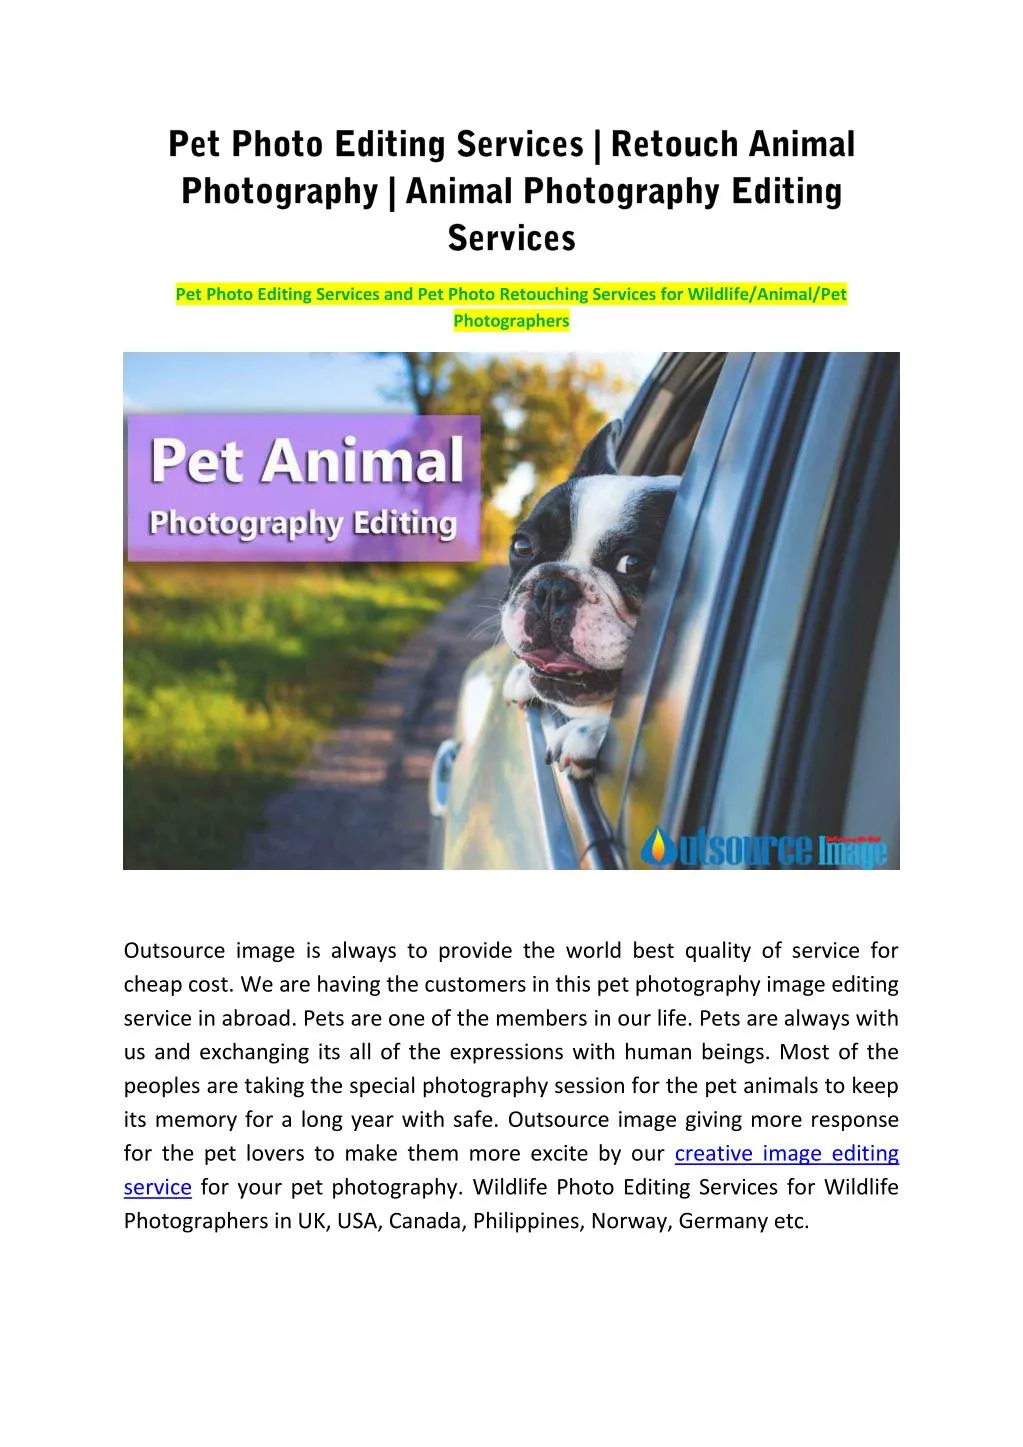 pet photo editing services and pet photo